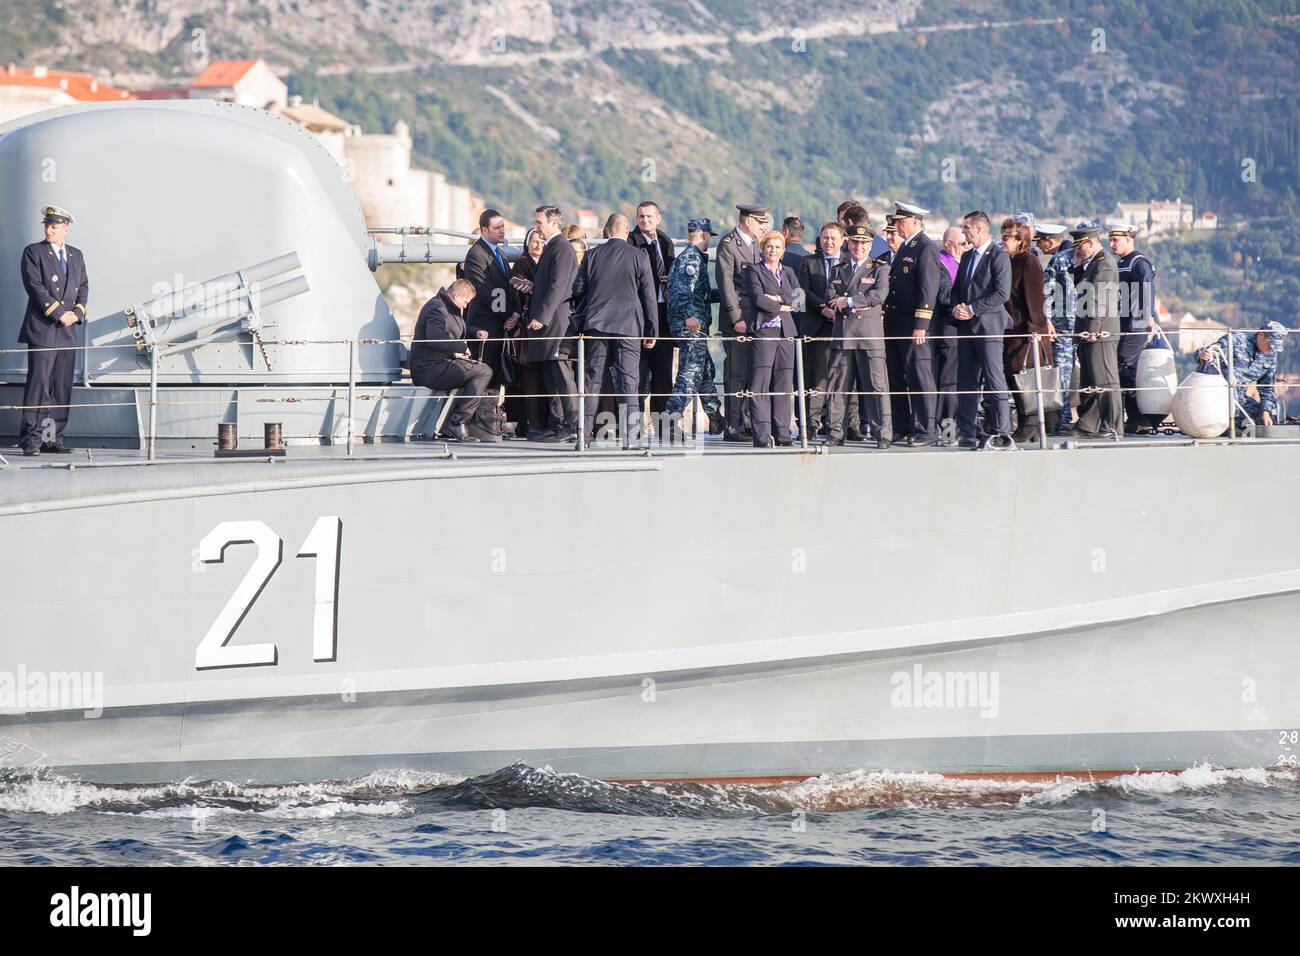 06.12.2016., Croatia, , Dubrovnik - On the occasion of the 25th anniversary of the defense of Dubrovnik during the Homeland War President of the Republic of Croatia Grabar Kitarovic Kollinda threw a wreath into the sea from missile boats Sibenik.  Photo: Grgo Jelavic/PIXSELL Stock Photo